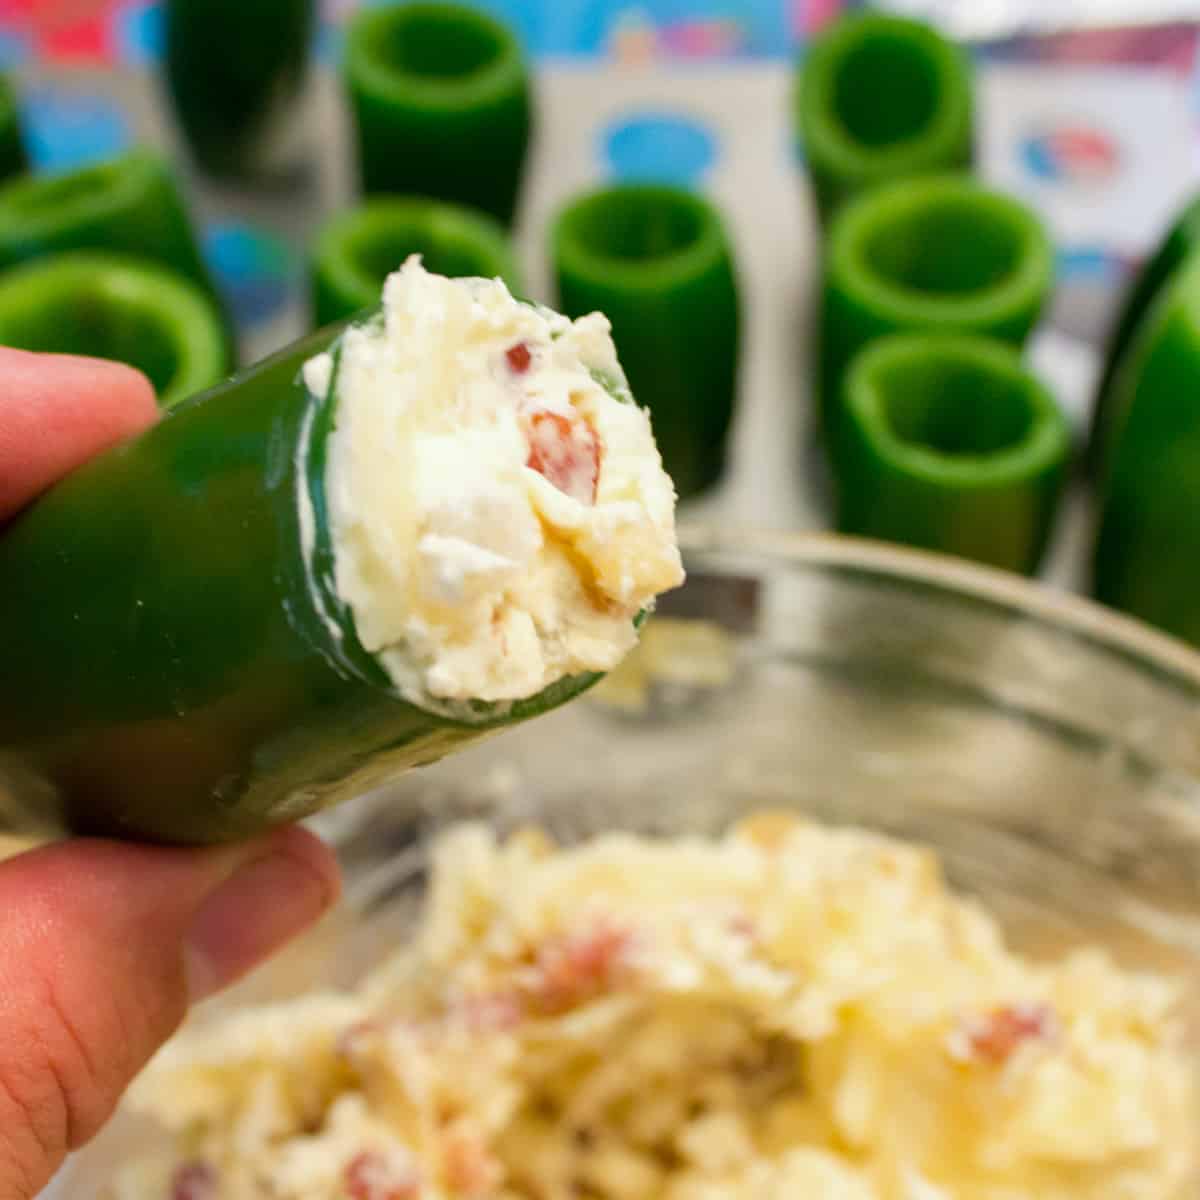 A cored jalapeño pepper being stuffed with a cream cheese and chorizo mixture.